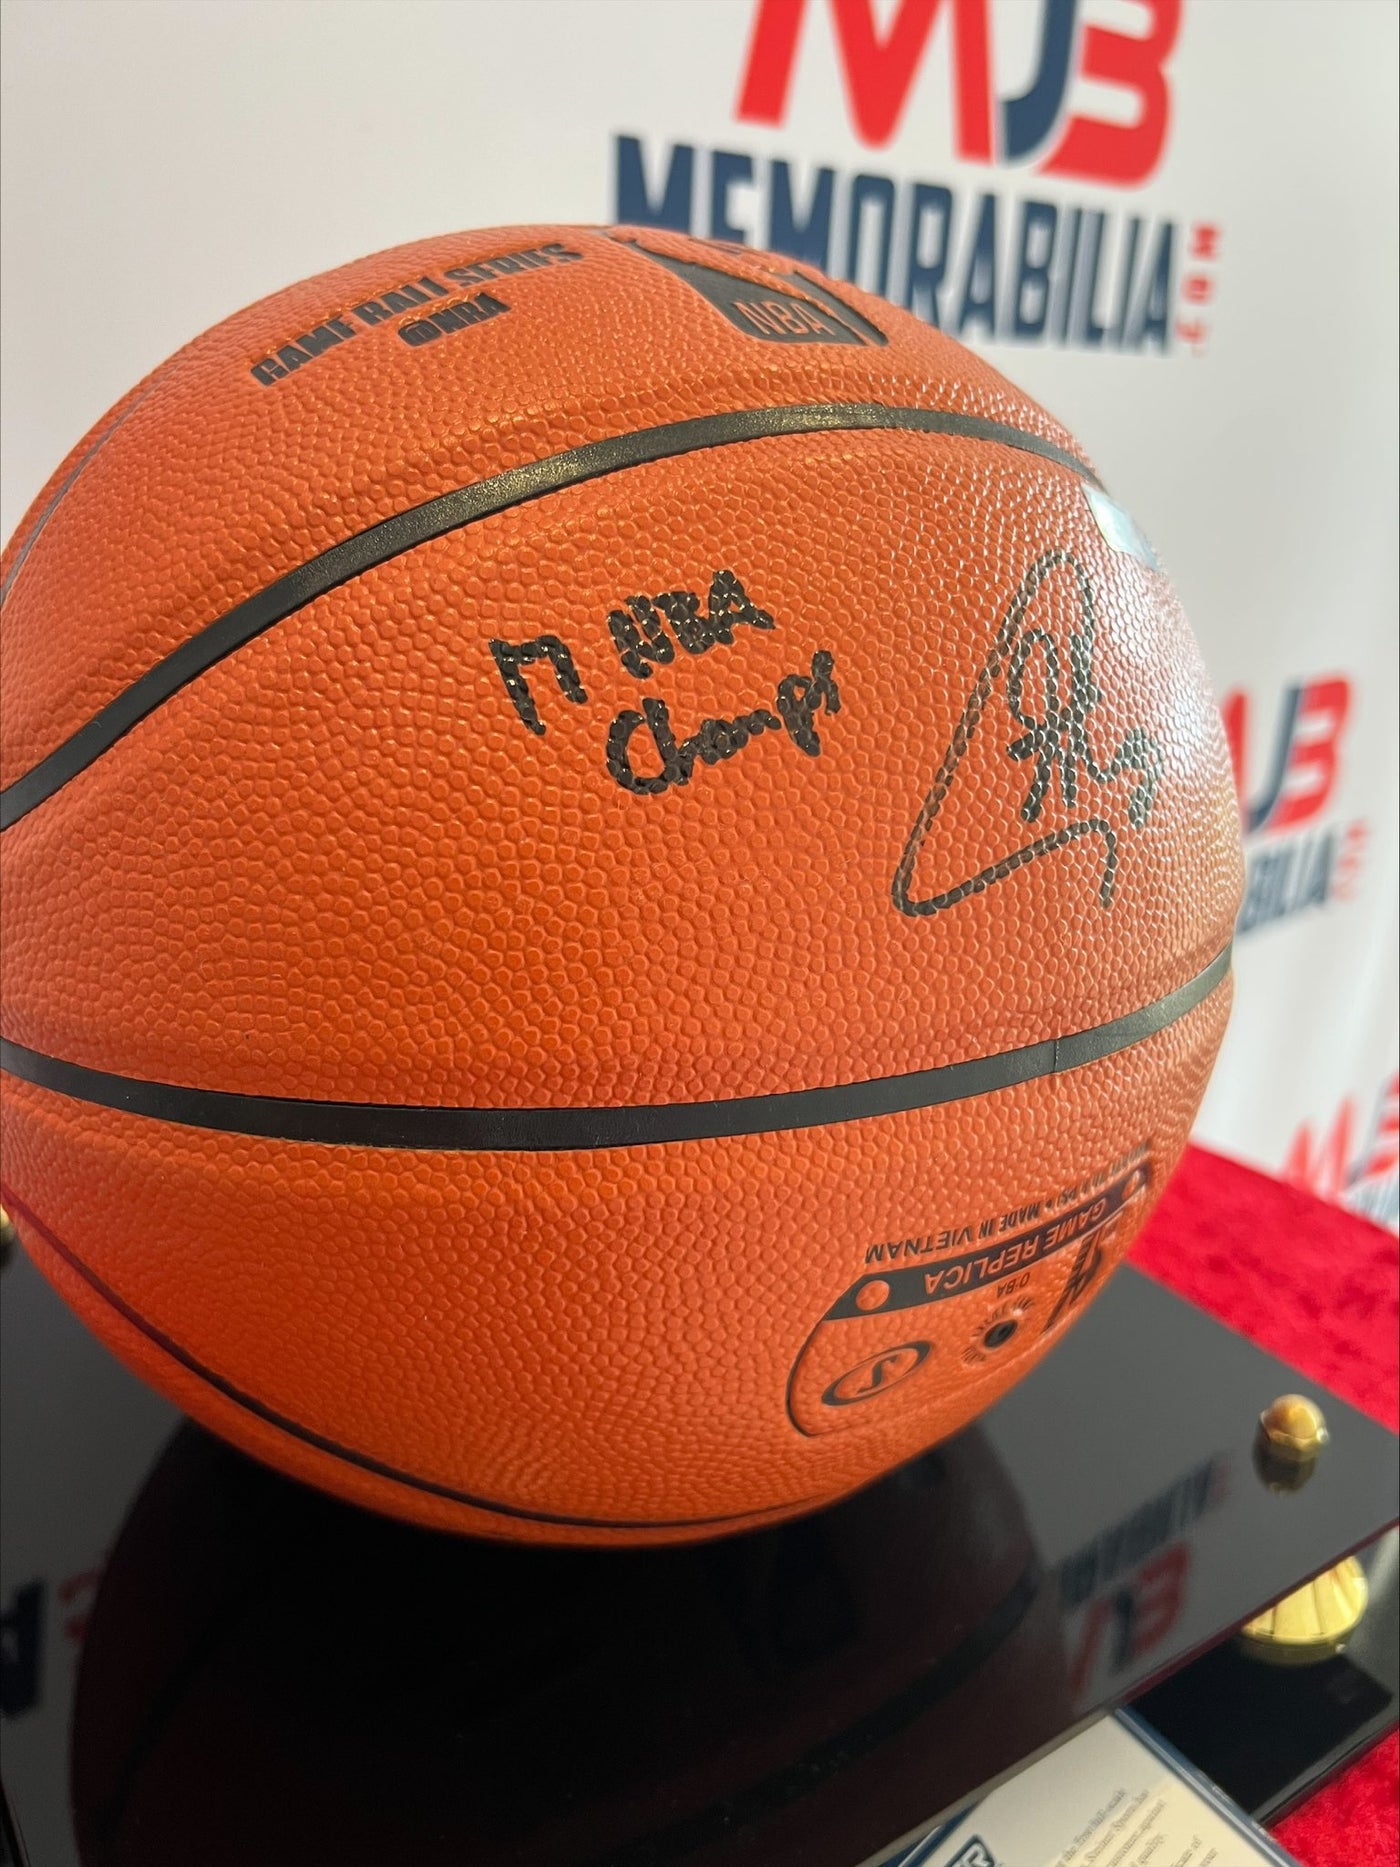 Stephen Curry Signed Basketball RARE Inscription 17 NBA Champs Steiner Authentication